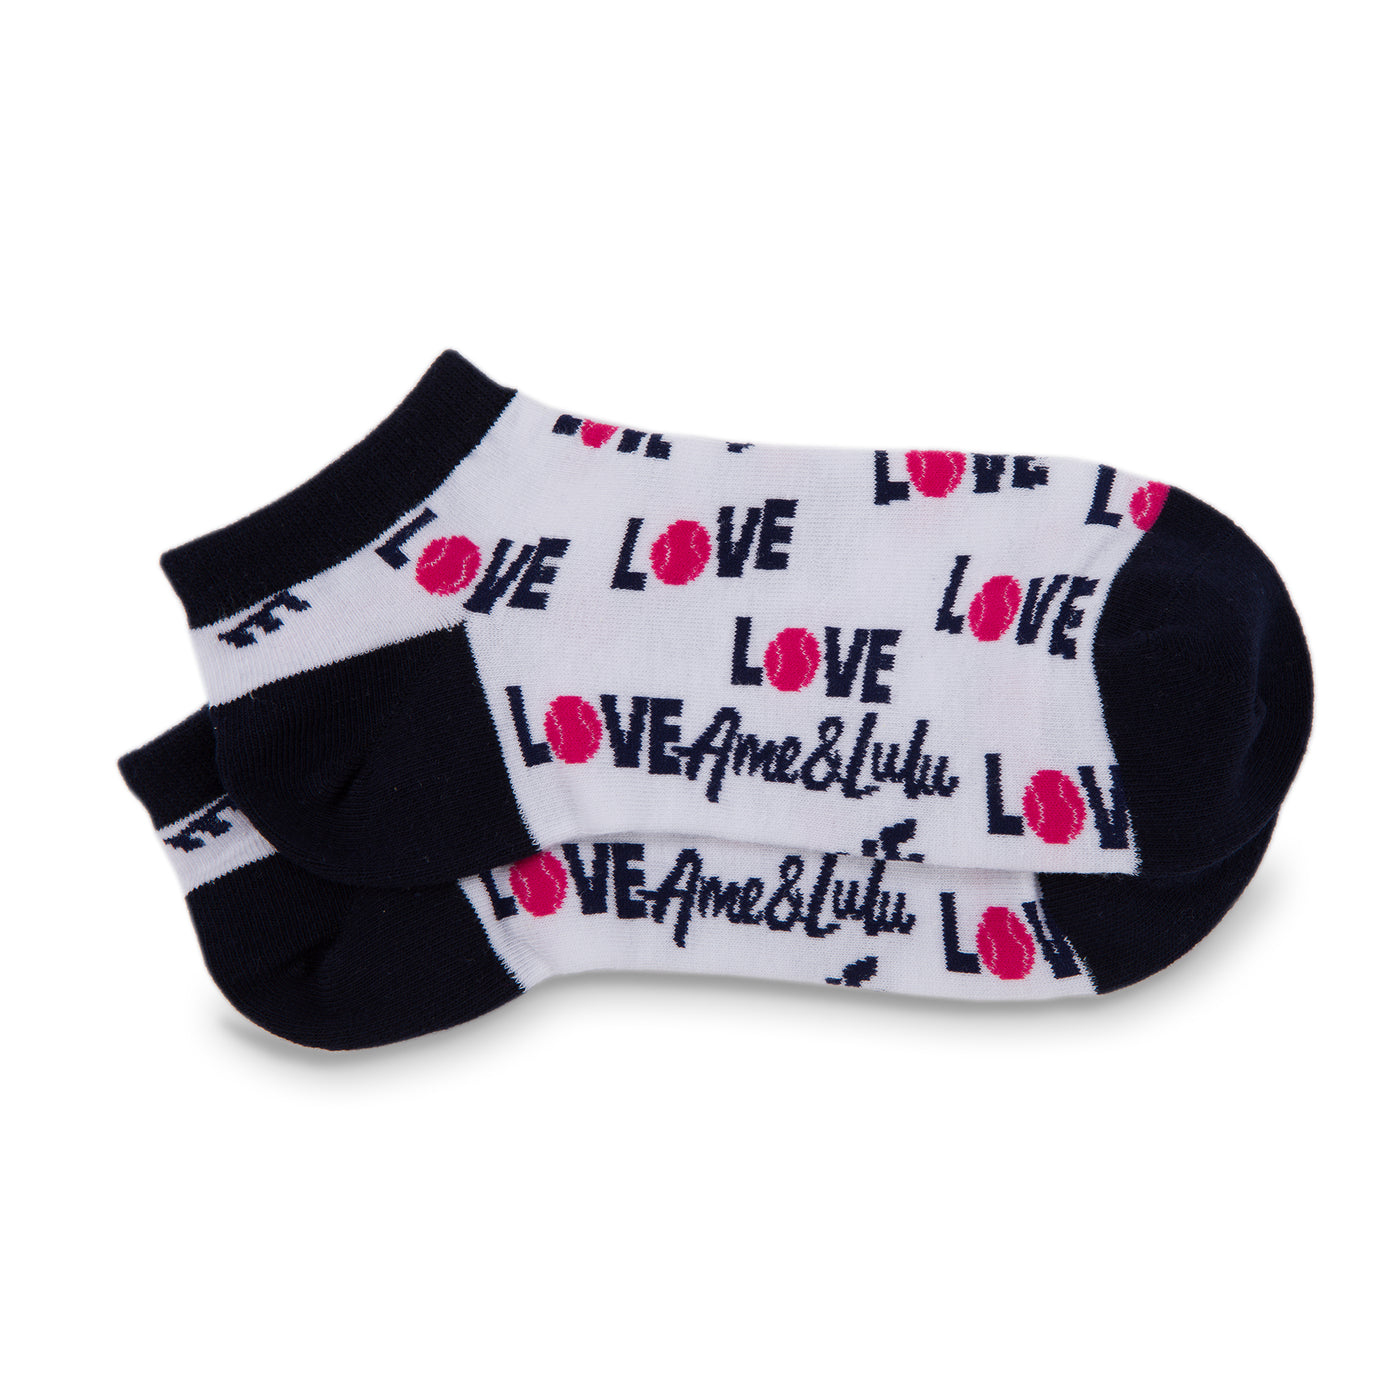 a pair of white socks with navy heels and toes. The word love in navy with a pink tennis ball for the letter o are printed around the socks